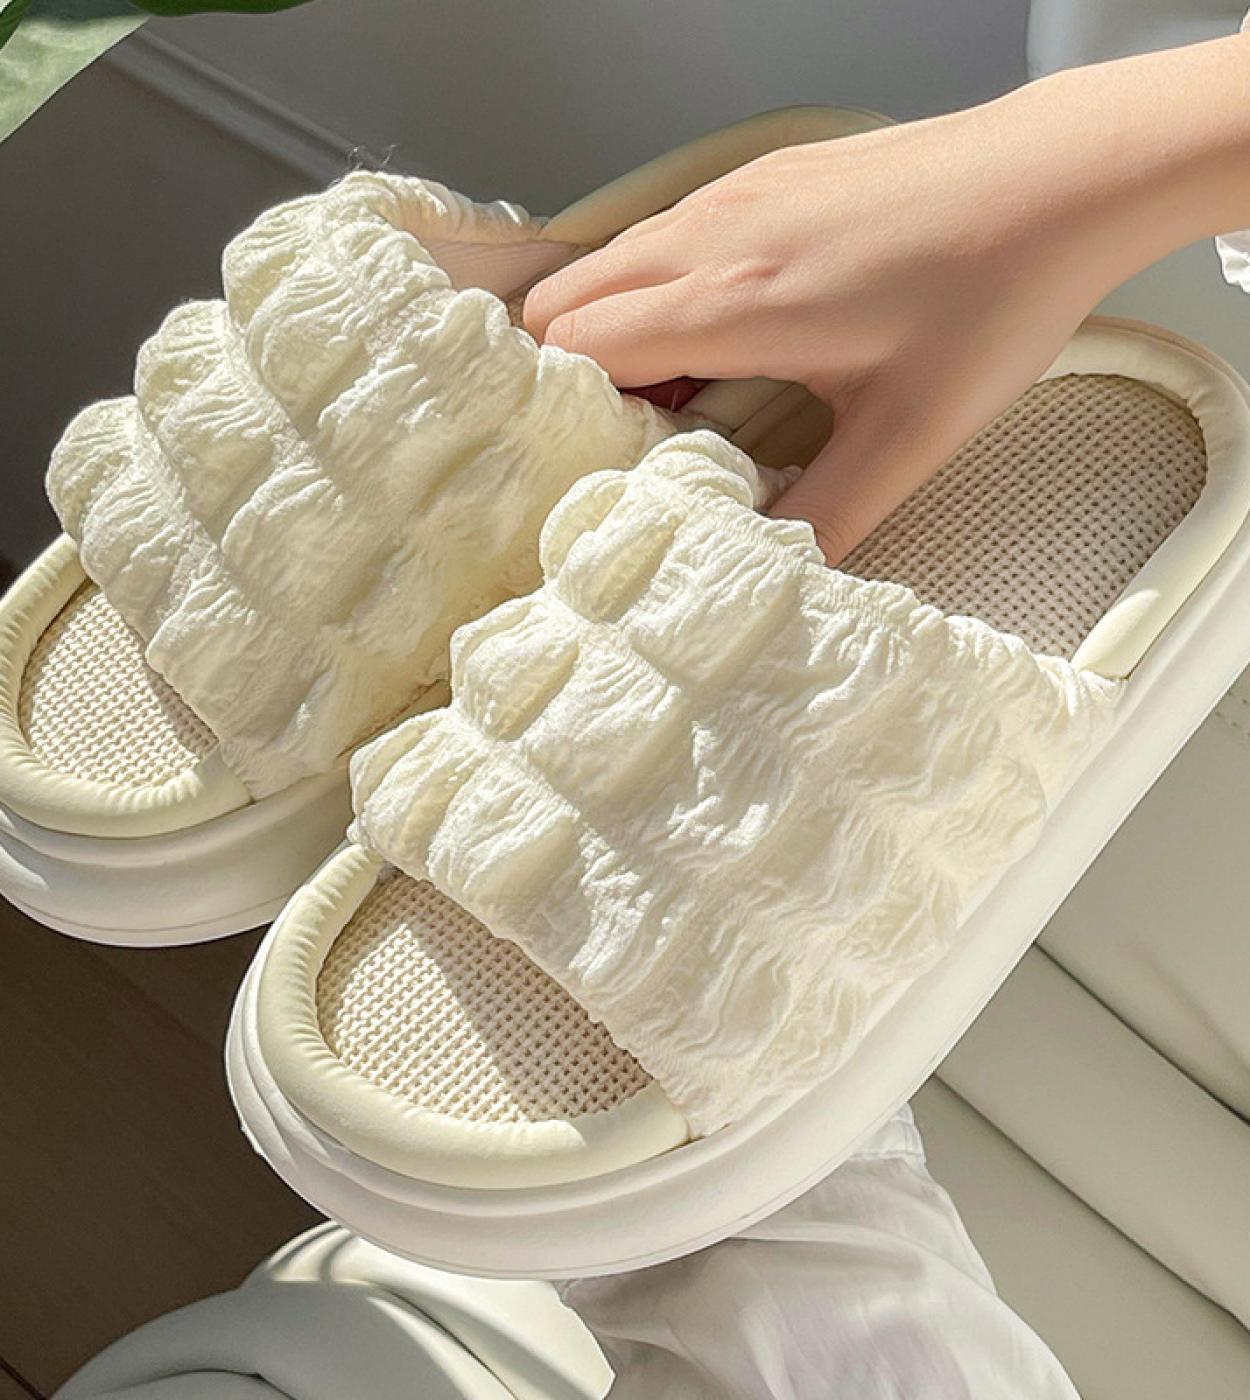 New Four Seasons Eva Thick Bottom Linen Slippers Womens Spring And Autumn Indoor Mute Home Soft Bottom Womens Slippers